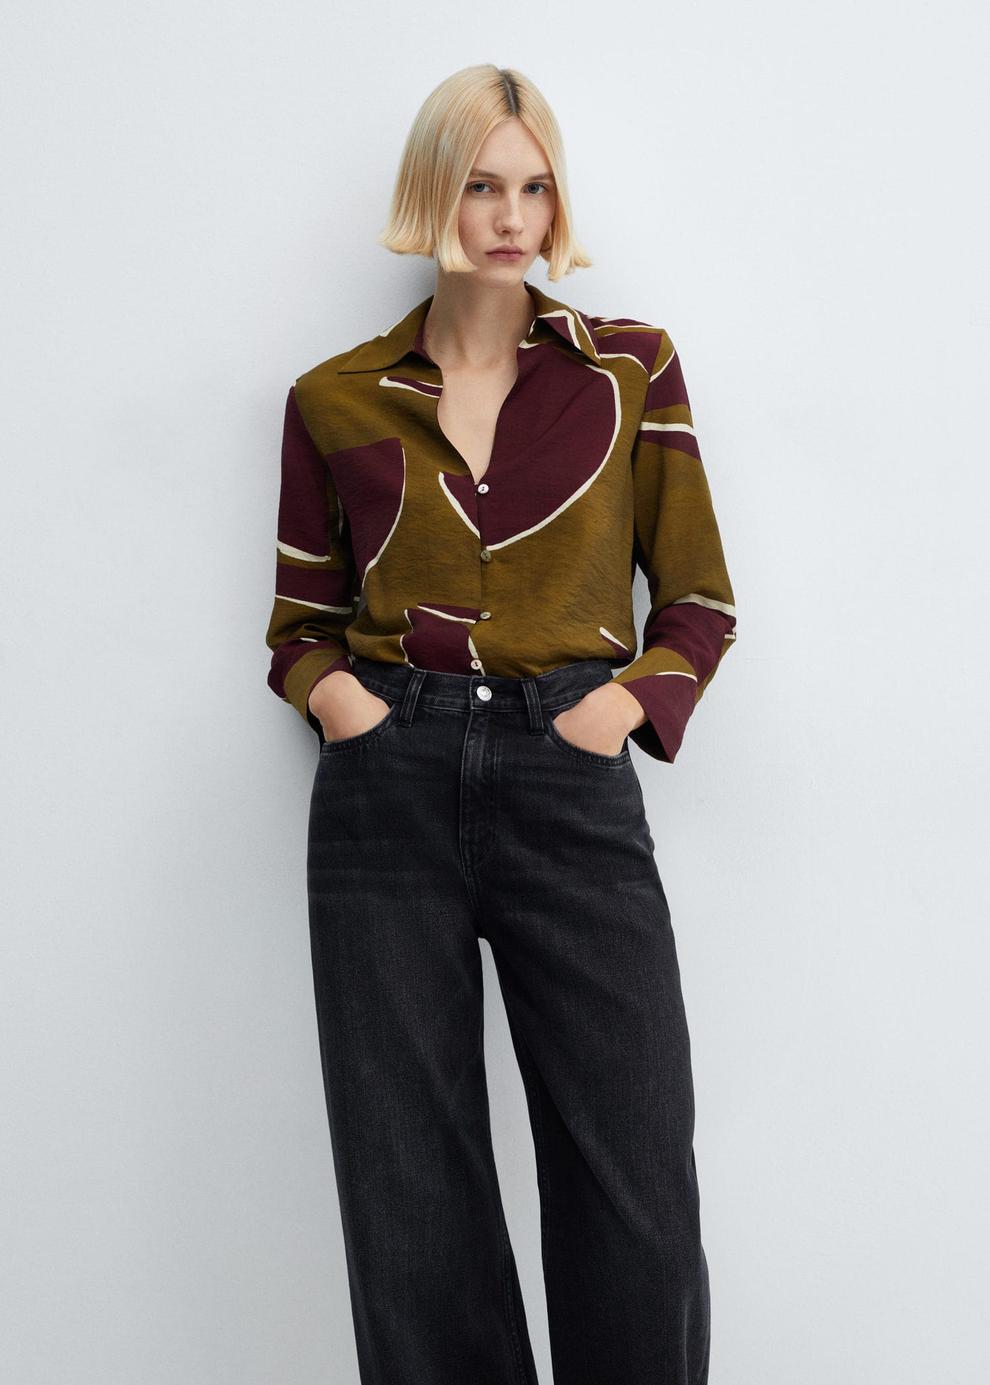 Satin print shirt offers at S$ 49.9 in Mango